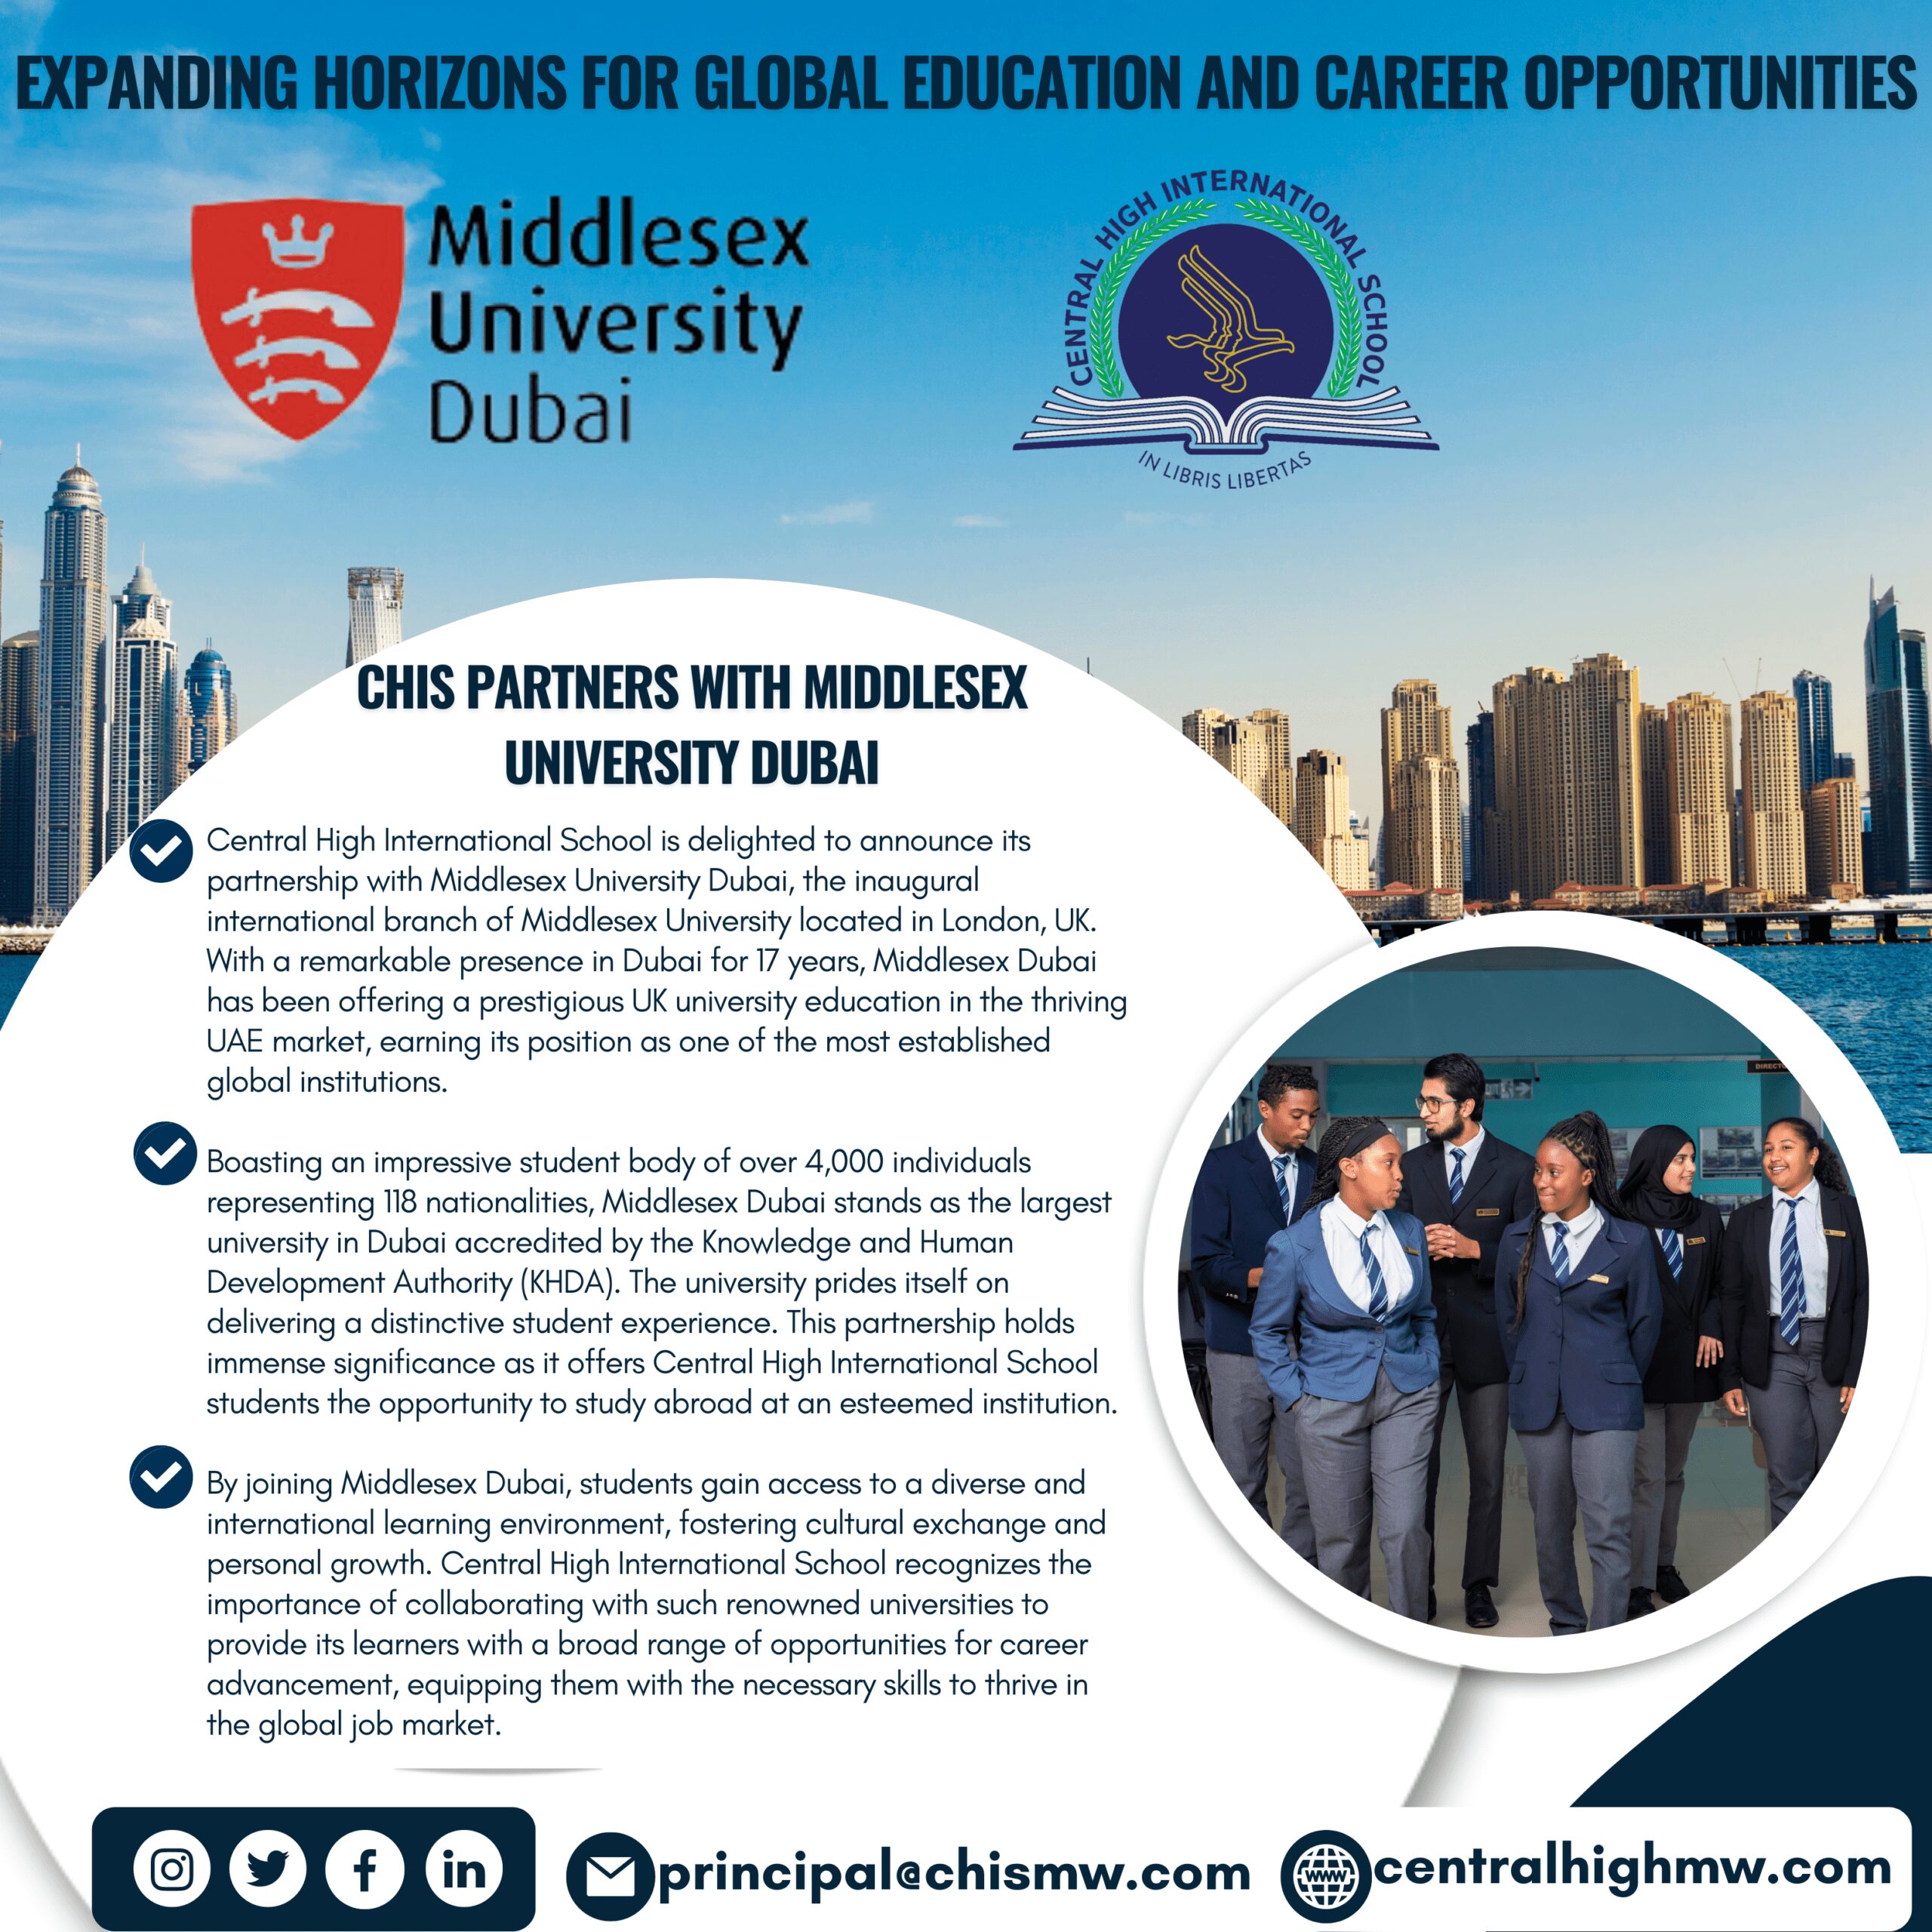 Study in Dubai  Affordable Tuition, Career Opportunities